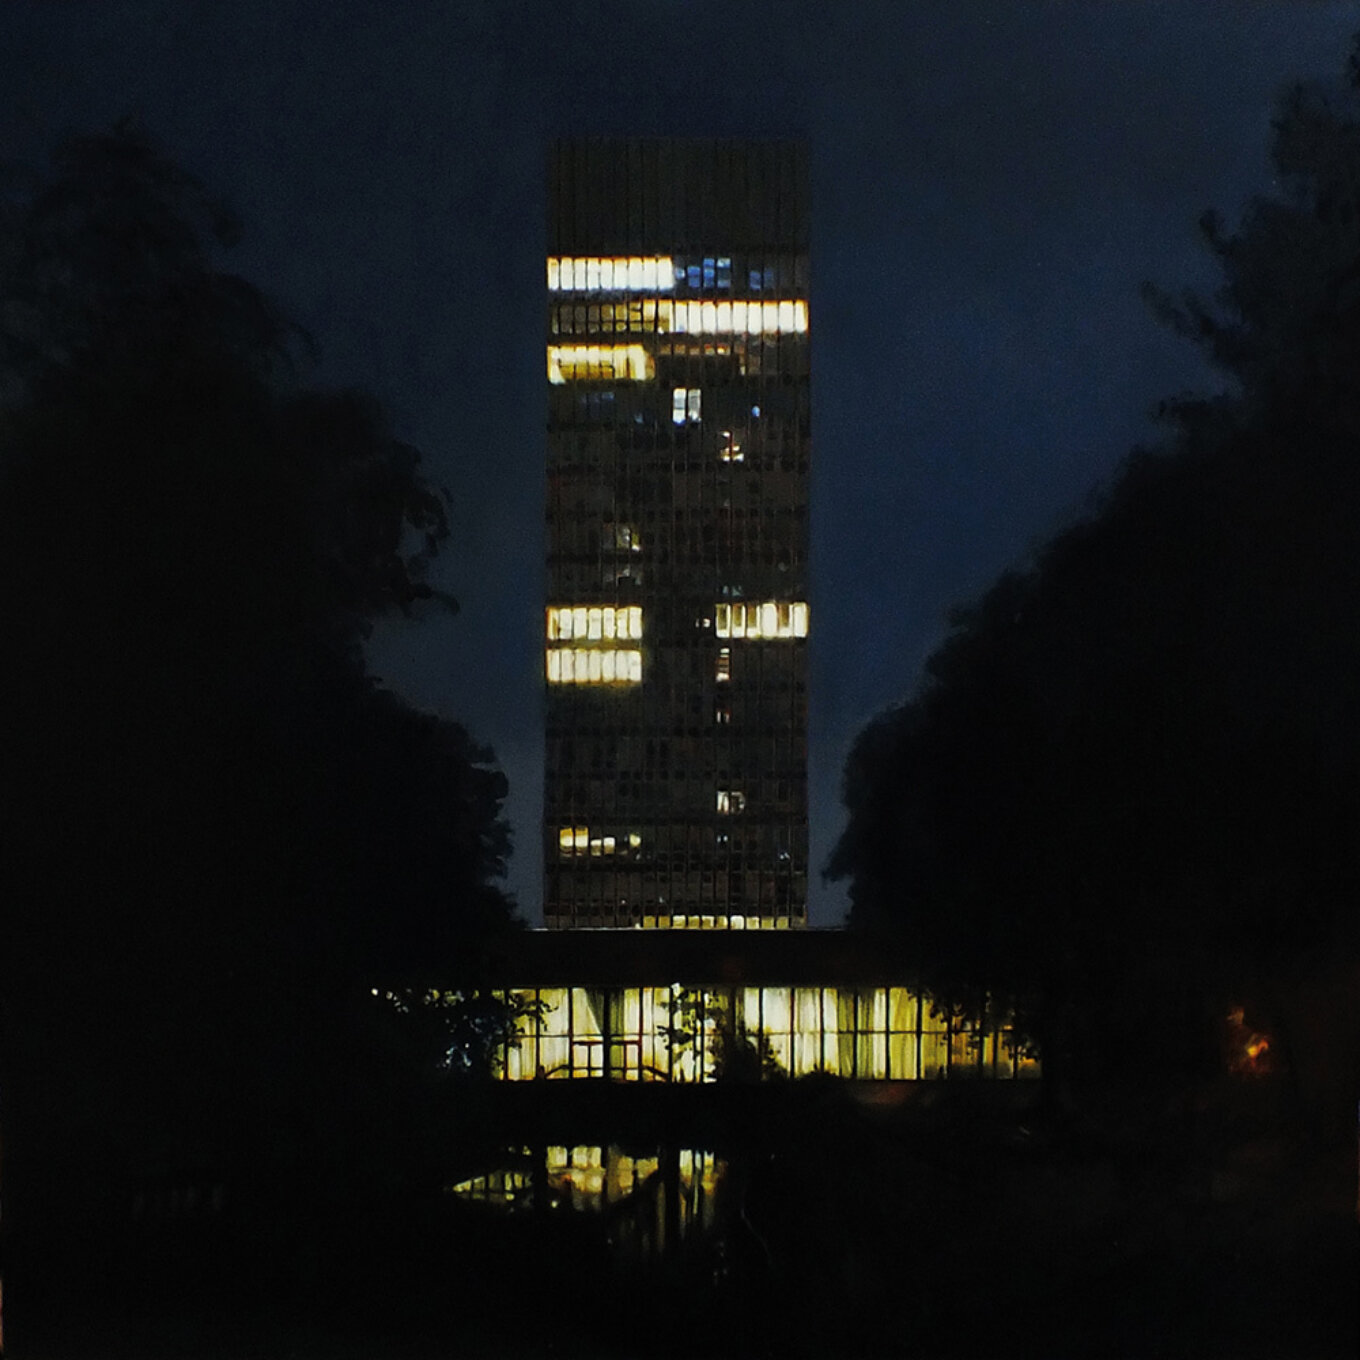 G2 Andy Cropper Arts Tower2018 Viewed From Within Weston Park Oil On Panel50cmx50cm1938x1938px